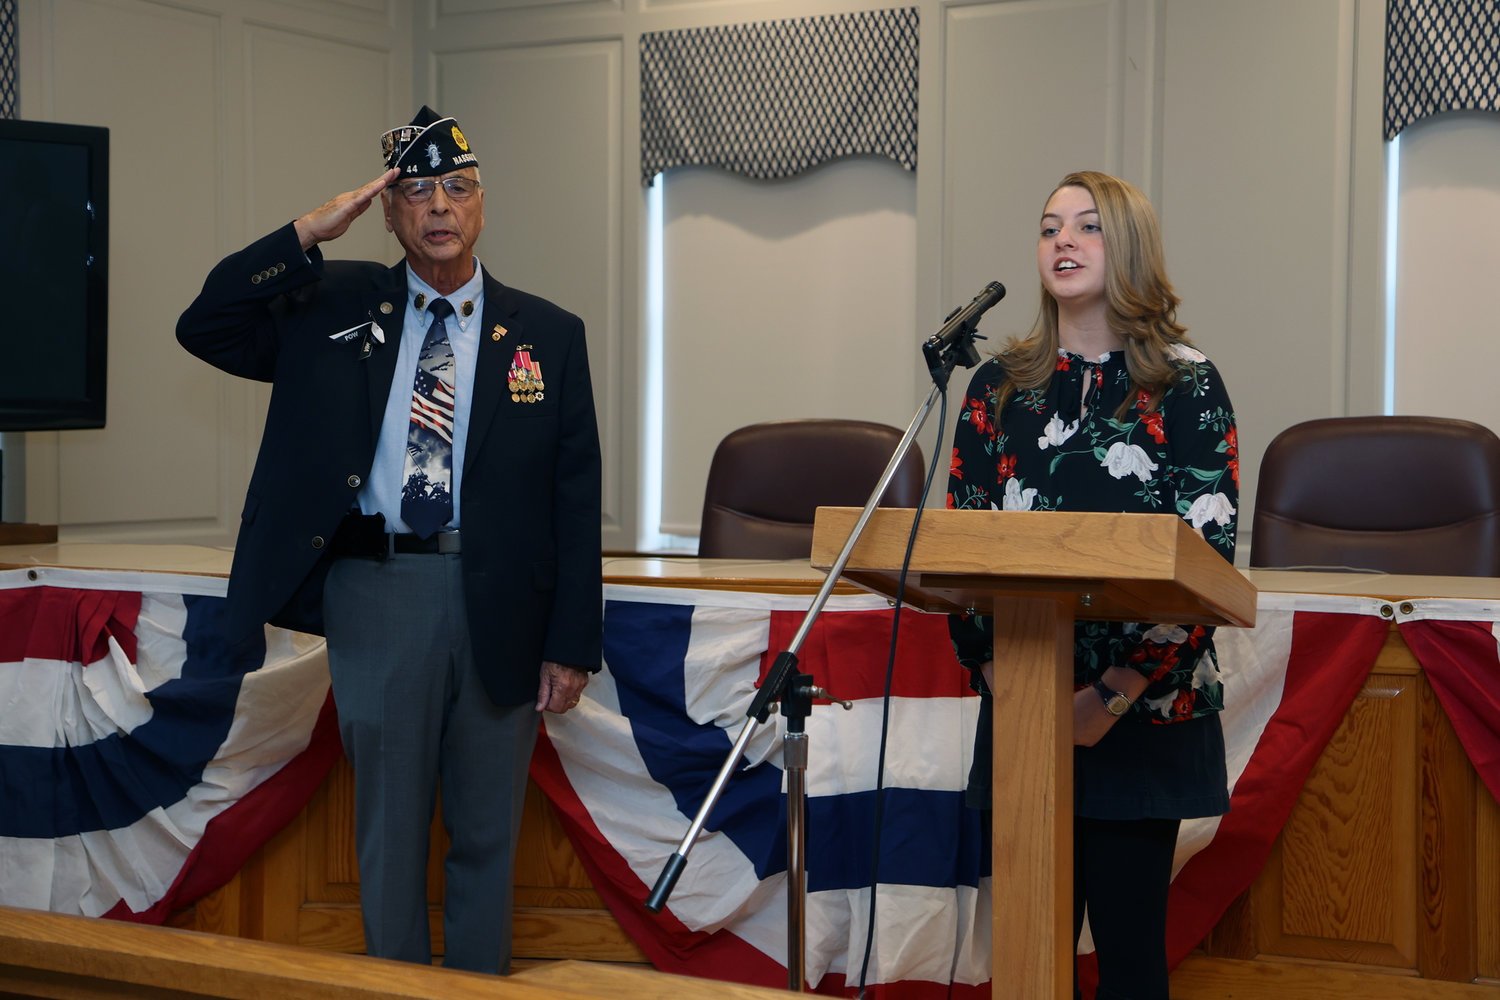 Kaylee Palmer of Malverne sang the Star Spangled Banner and God Bless America during the village’s annual Veterans Day observations.